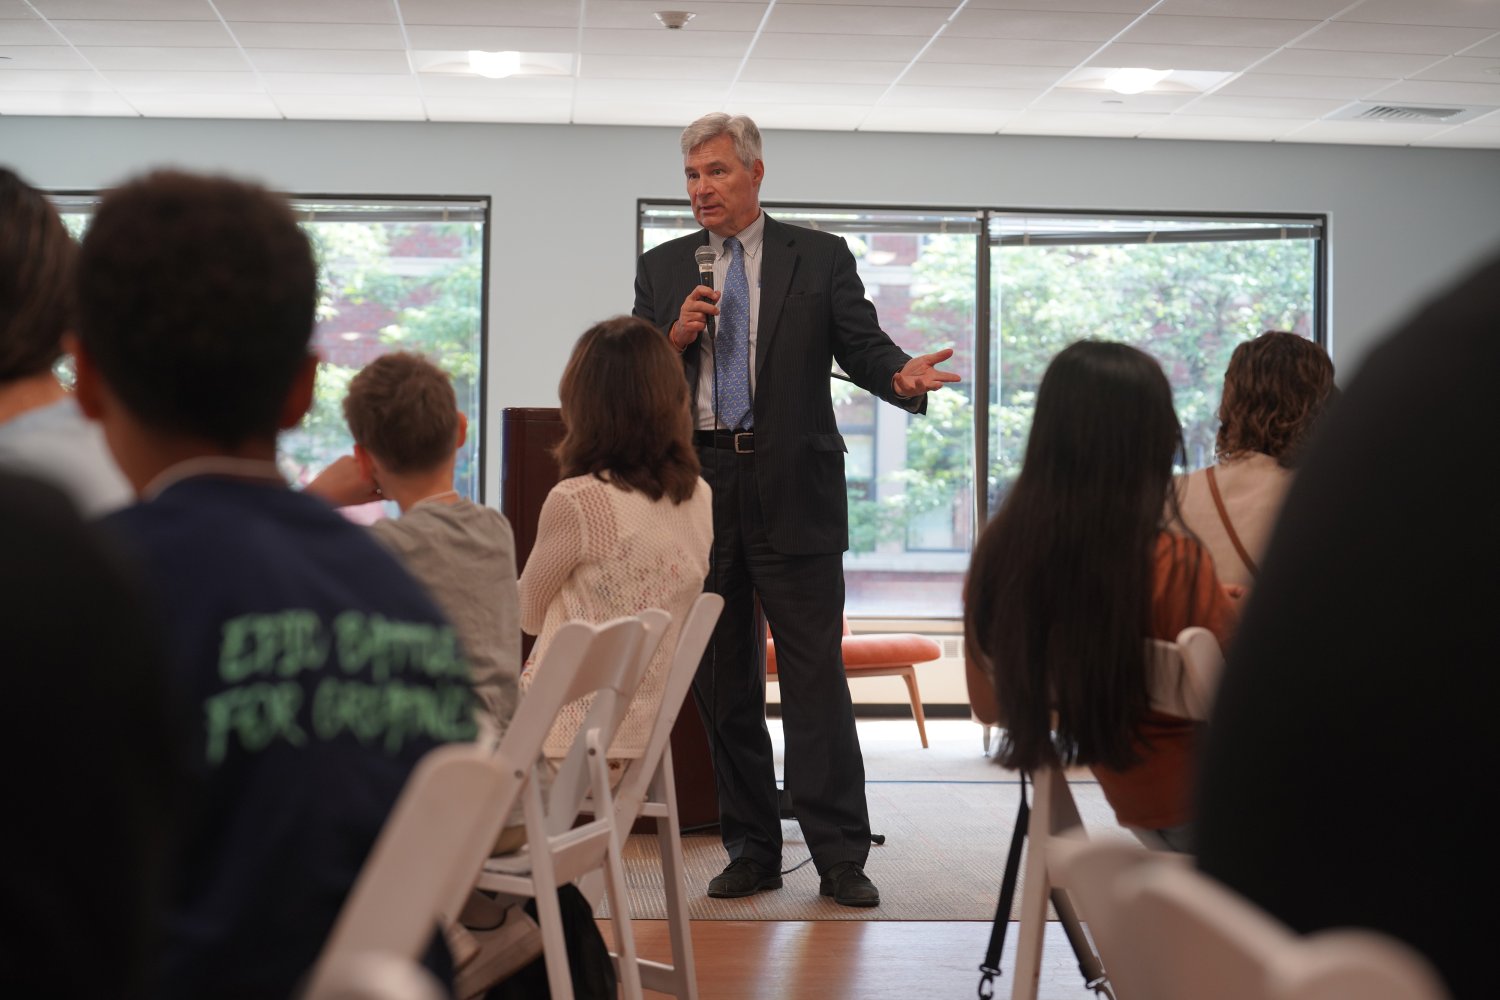 U.S. Sen. Sheldon Whitehouse speaks to campers about the importance of law and justice in a democracy.